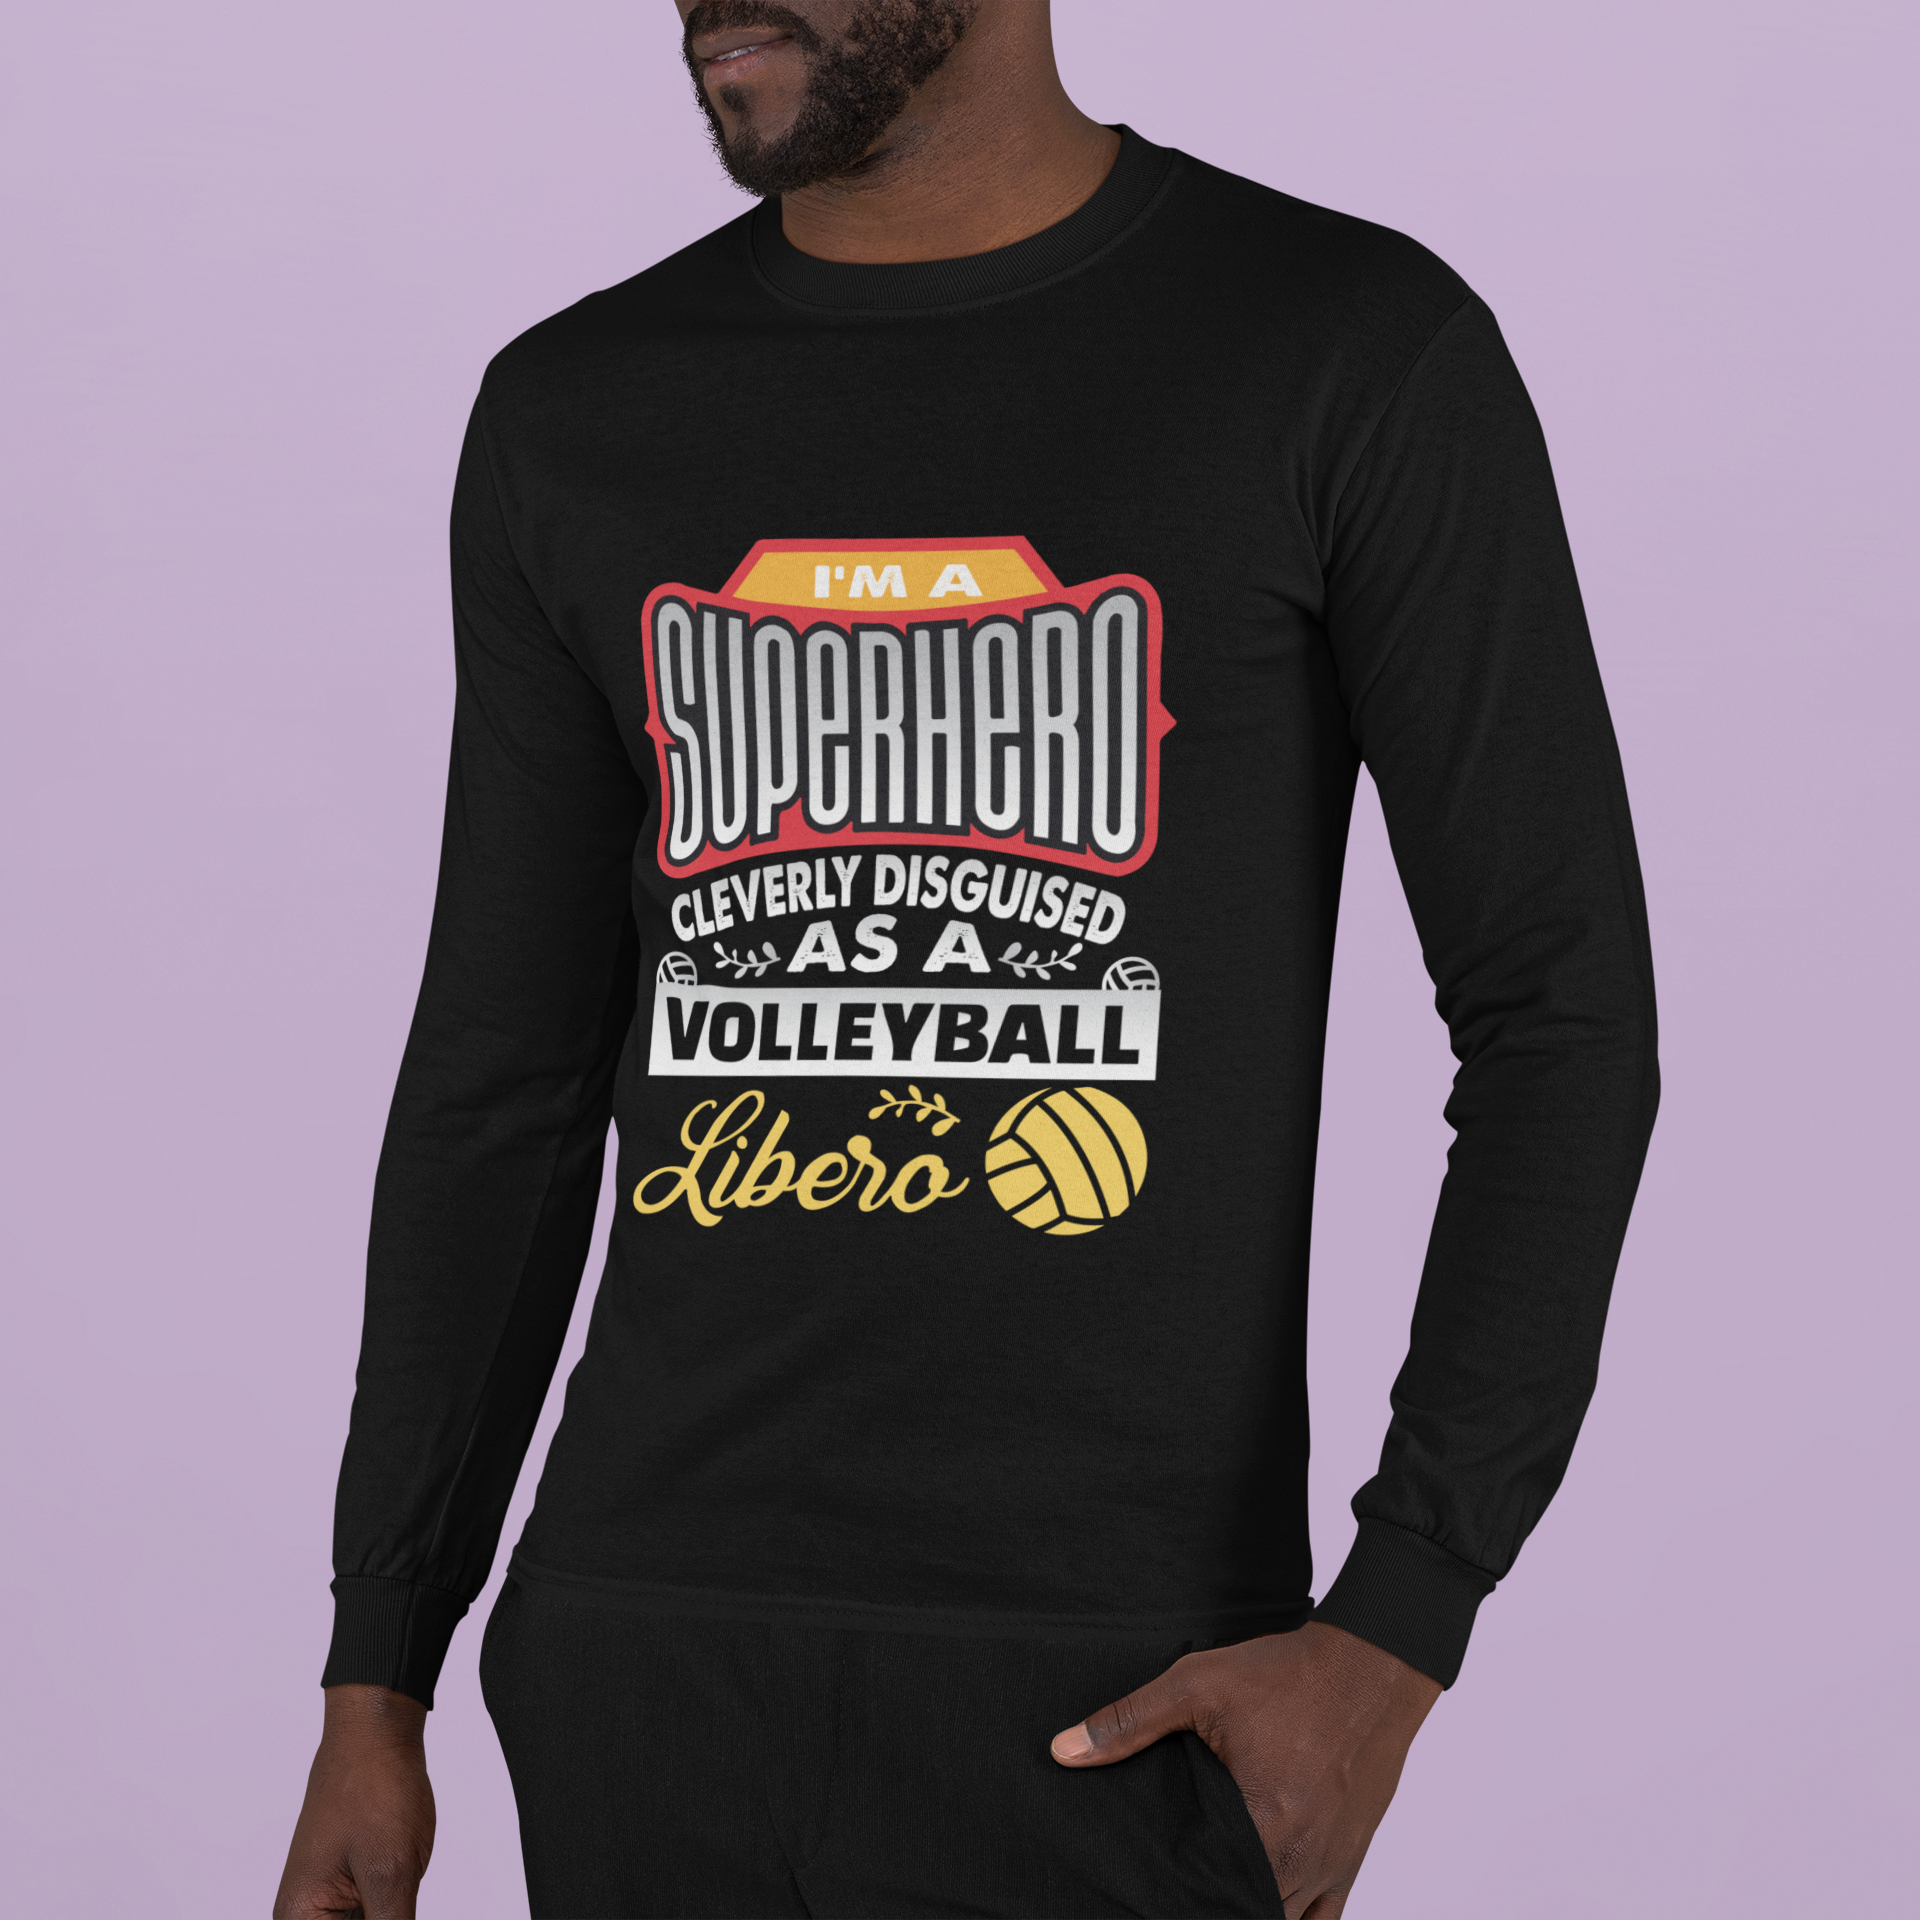 I Am A Superhero Cleverly Disguised as a 
LIBERO! My Volleybragswag ETSY shop has volleyball gift ideas like really good volleyball sayings for shirts that you can't find anywhere else.